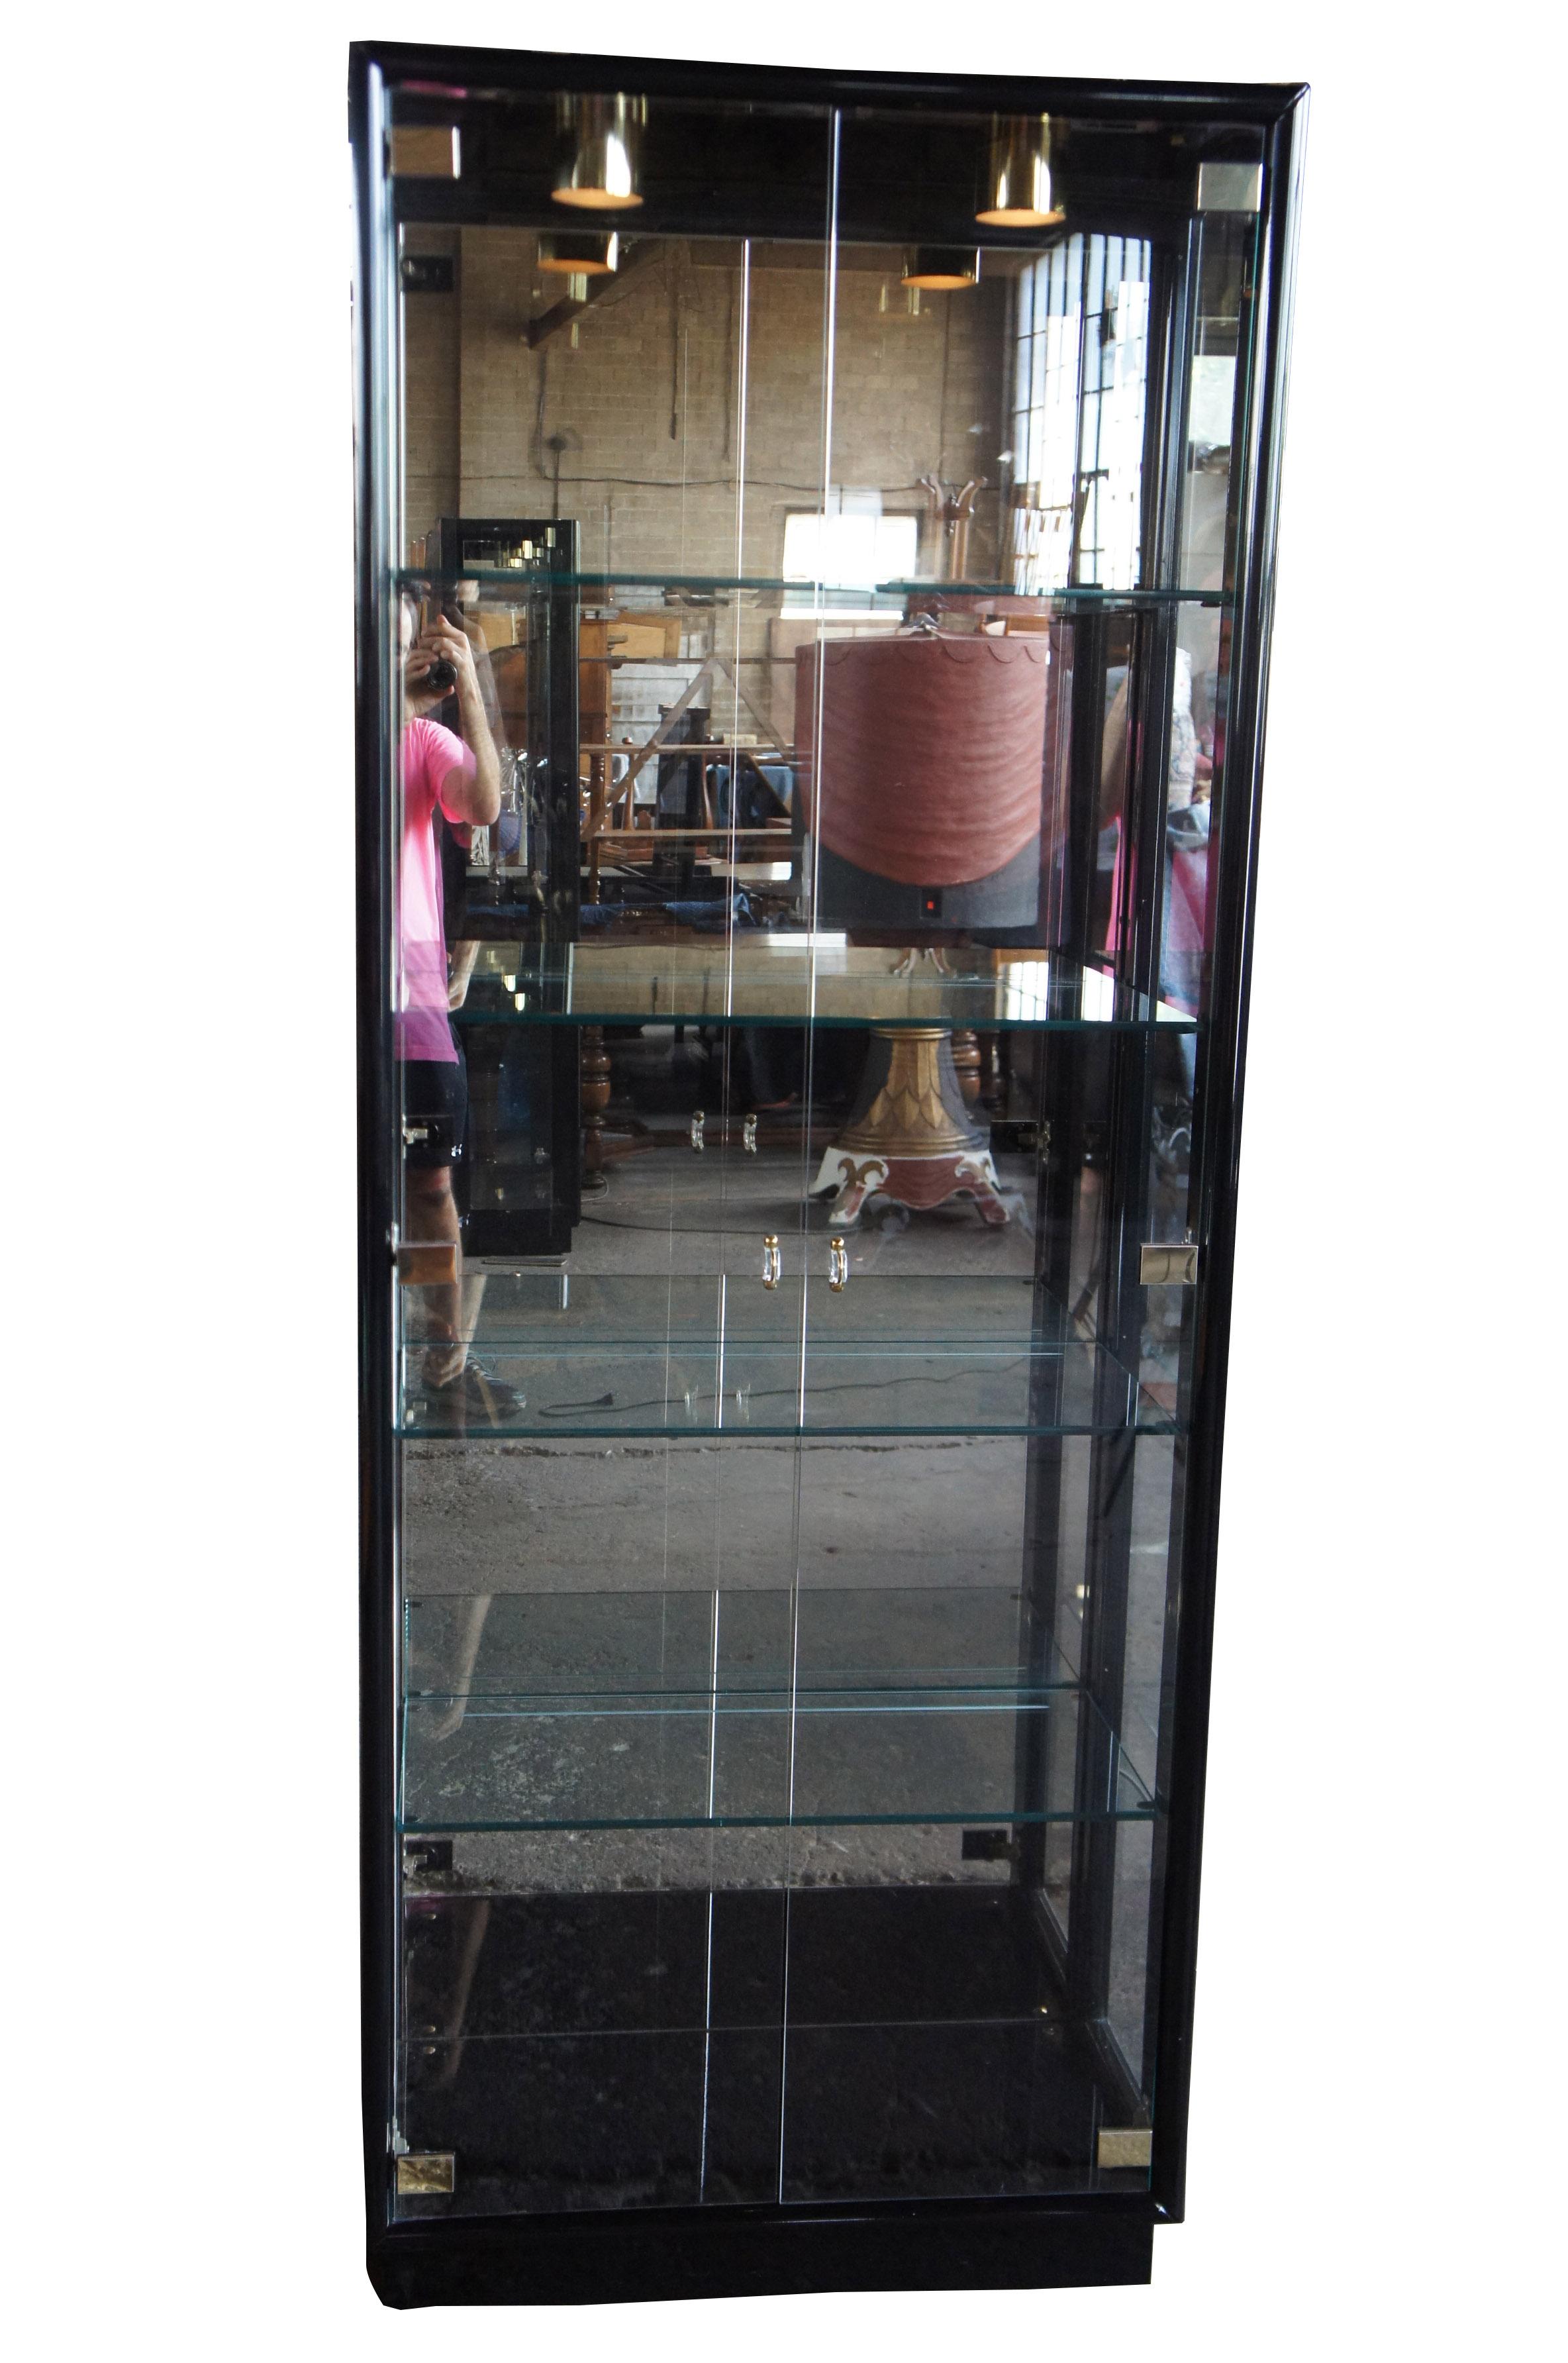 Henredon black lacquer Asian modern curio display cabinet bunching scene three

Up for consideration is a beautiful Henredon curio cabinet. Manufactured in 1988. These cabinets can be used as a stand alone or bunched together. Features a sleek